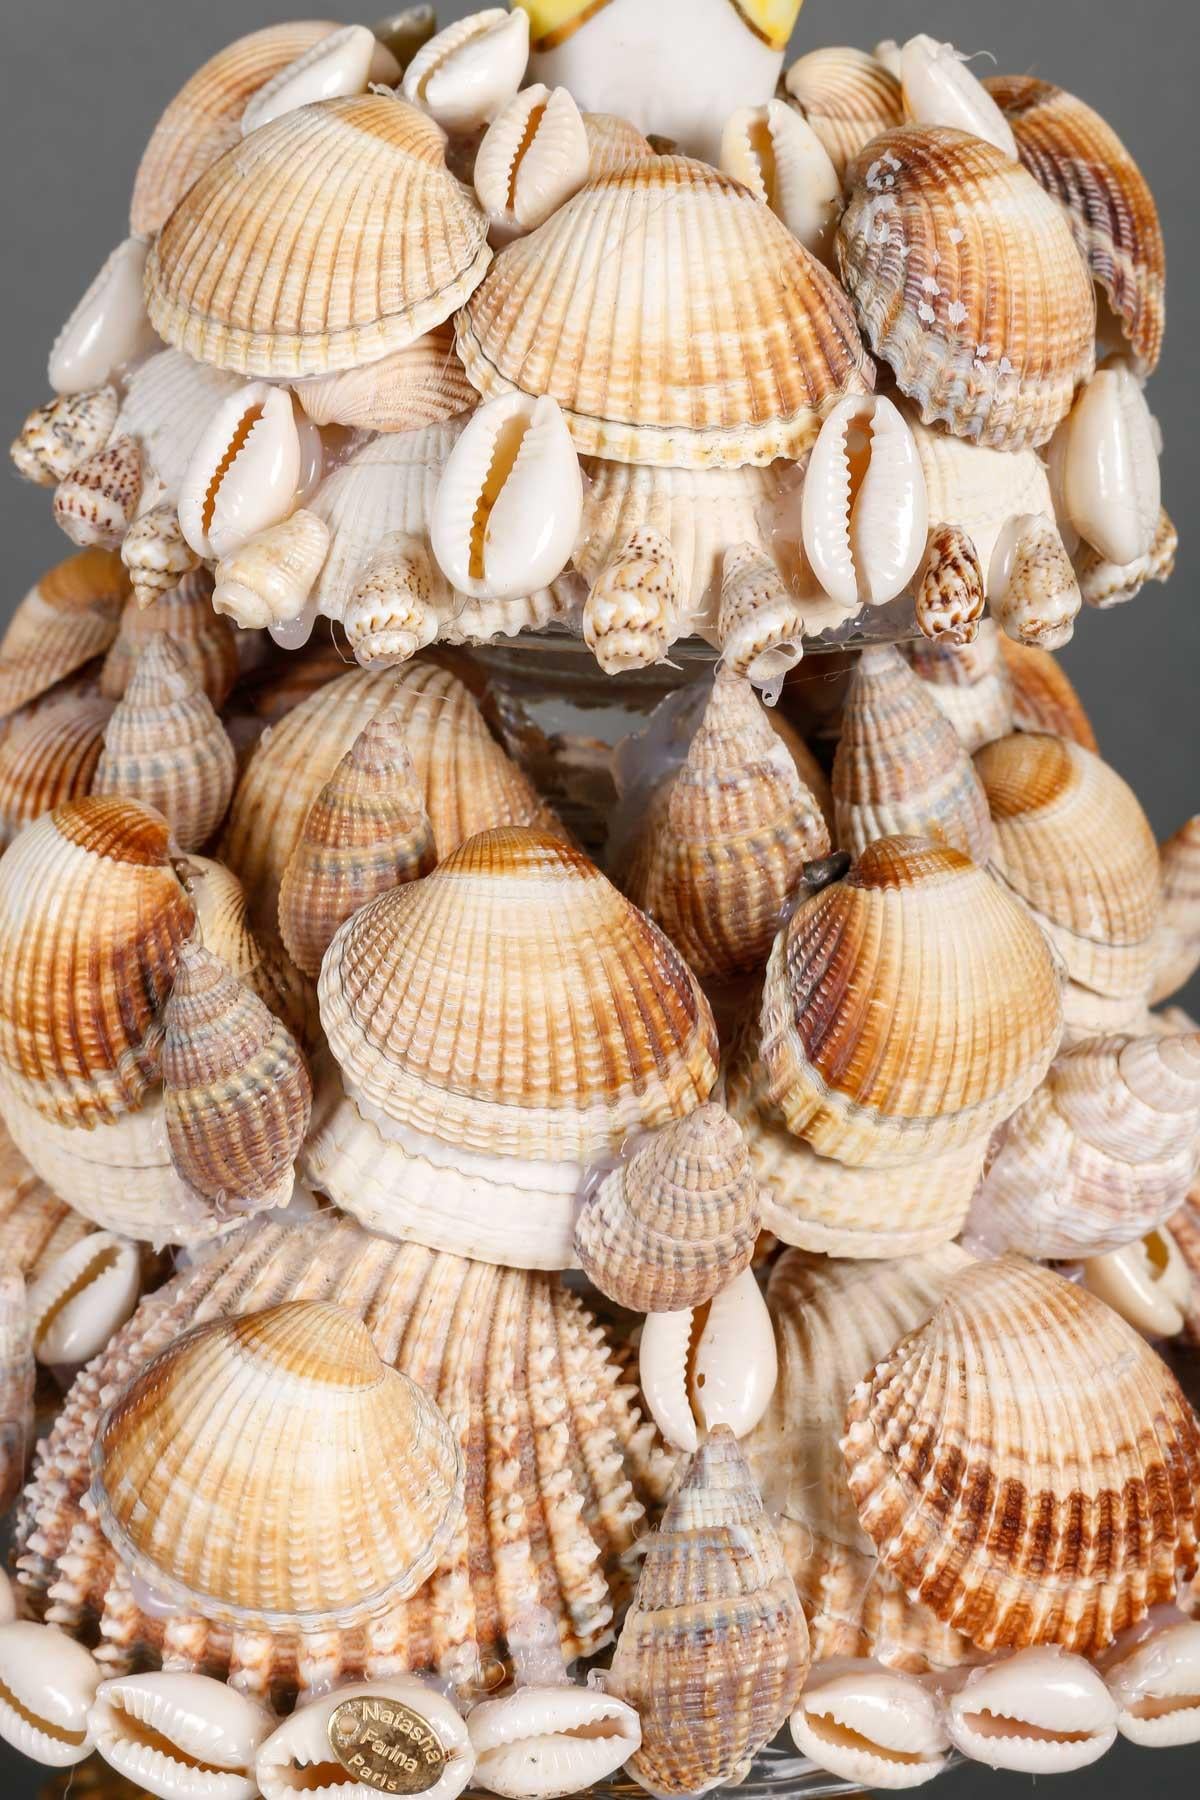 Modern Shell and Porcelain Sculpture, 20th Century.